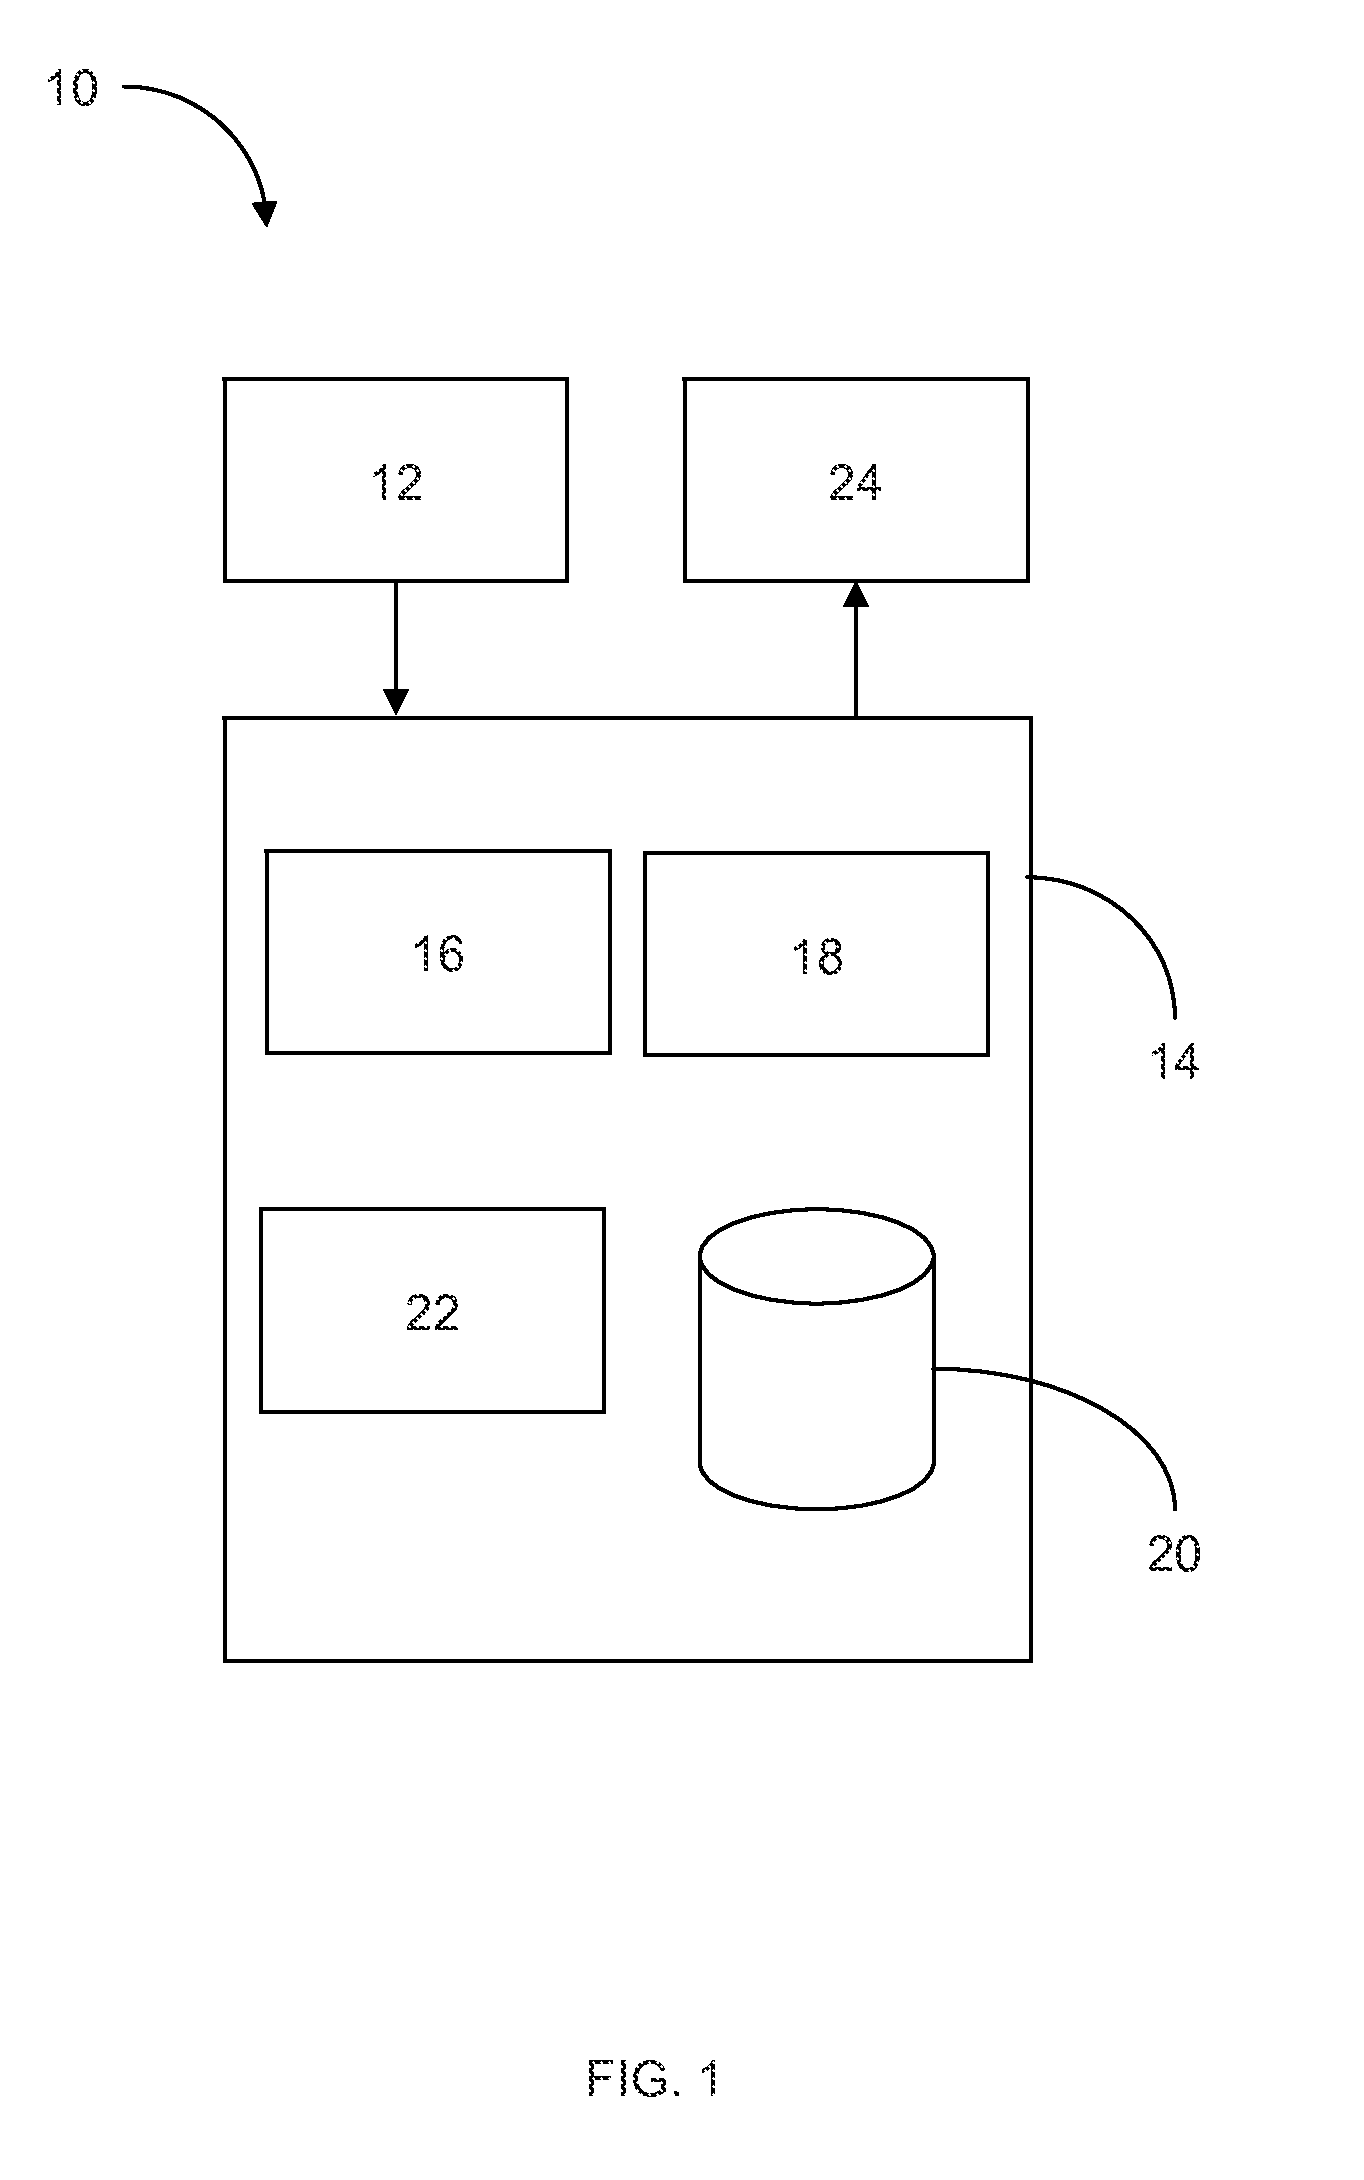 Systems and methods for non-intrusive drug impairment detection